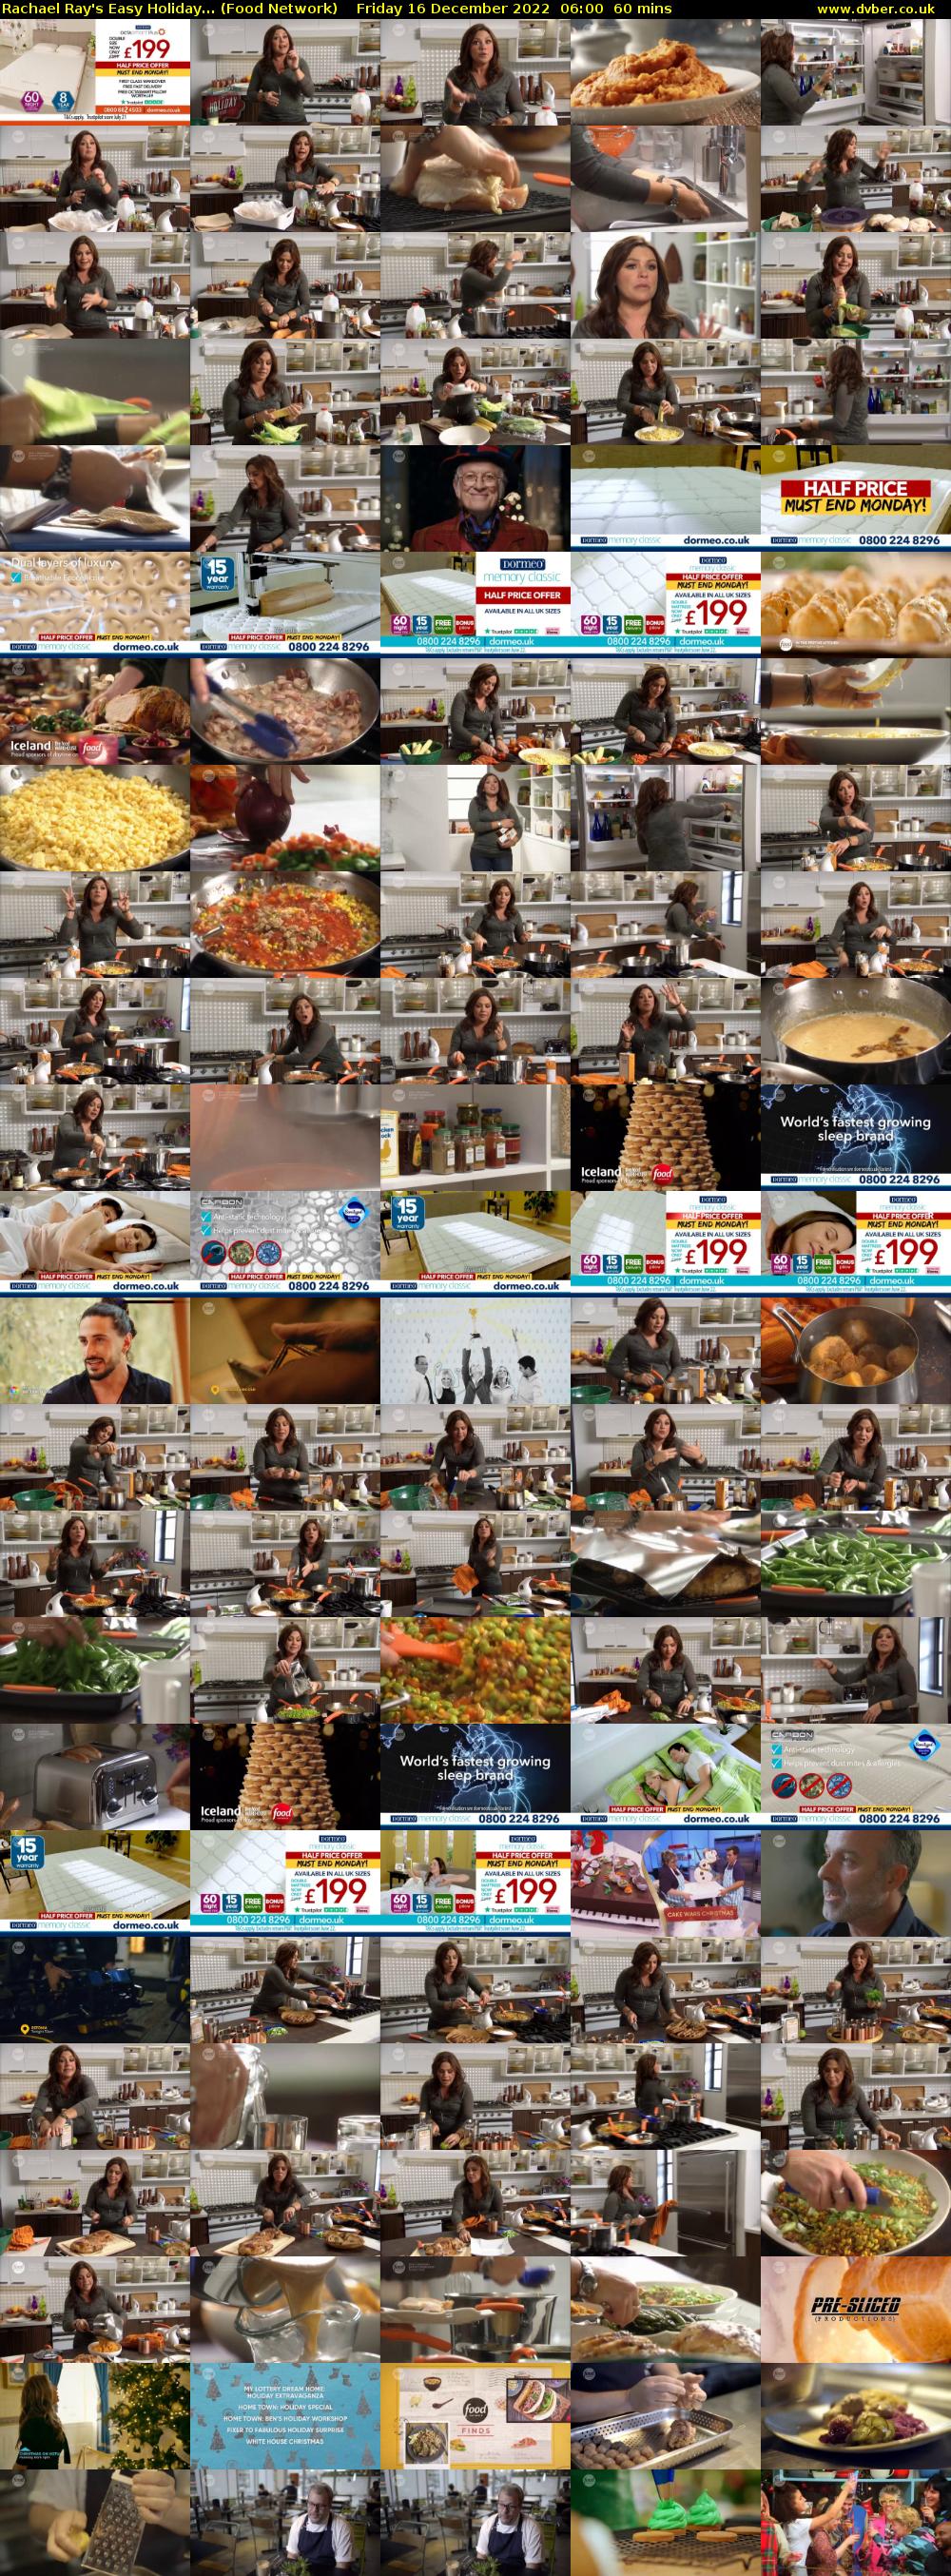 Rachael Ray's Easy Holiday... (Food Network) Friday 16 December 2022 06:00 - 07:00